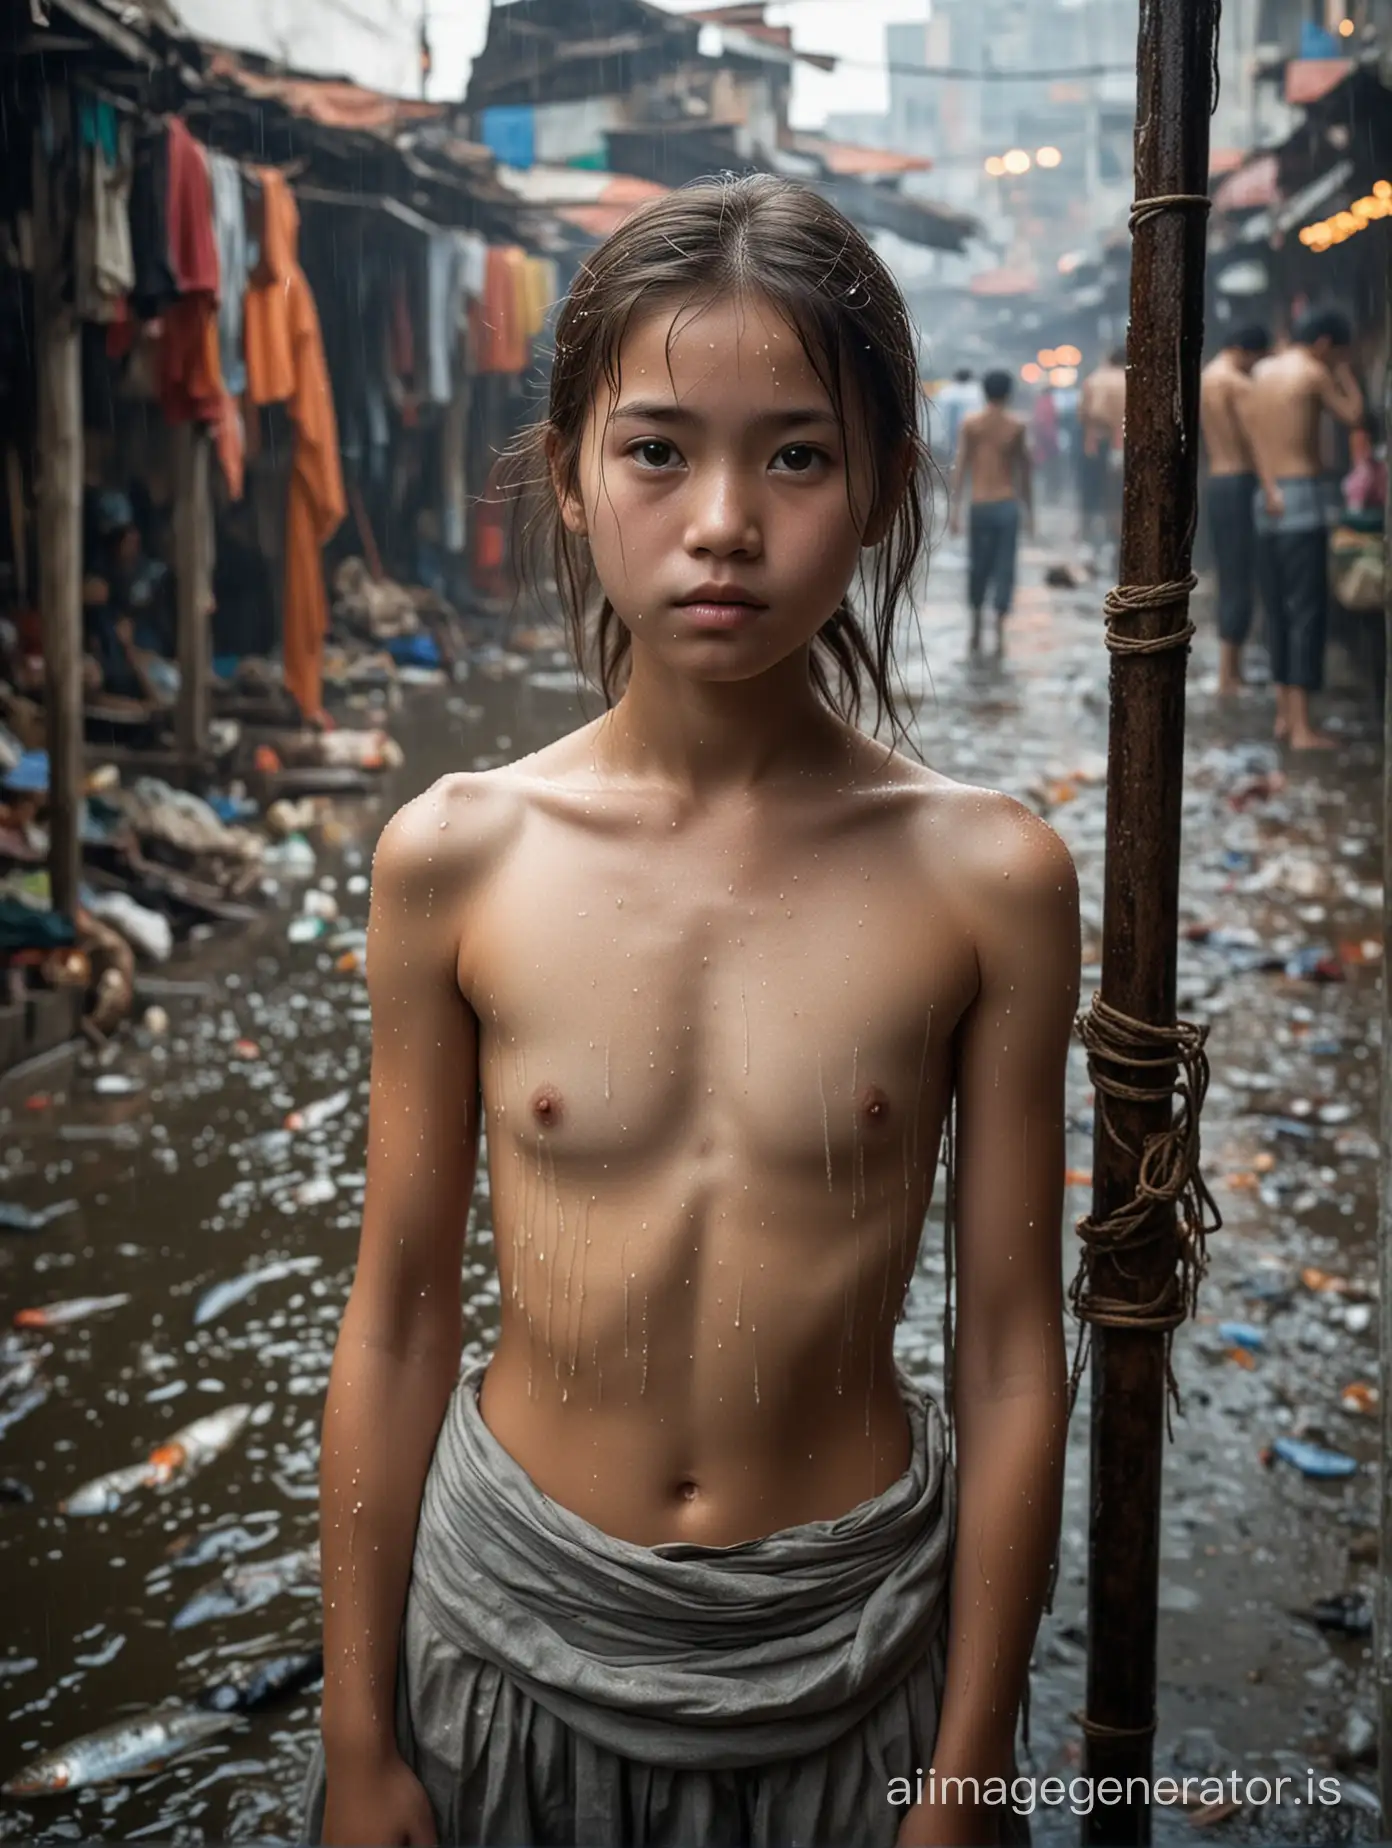 The image of the 13-year-old girl standing in the bustling Asian fish market is a striking and poignant one. Despite the chaos and commotion surrounding her, her presence is almost ethereal, standing out from the frenzied energy of the market. The beads of sweat glistening on her bare skin are a testament to the intense heat and humidity of the environment. The broken roof above allows slivers of natural light to filter through, casting an almost otherworldly glow on the girl's sweat-soaked frame. Her nudity adds a layer of vulnerability to the scene, as she stands exposed in a crowded and chaotic space. It is a powerful image that captures the rawness and harshness of life in a busy fish market, but also the innocence and resilience of this young girl. Despite the harsh conditions, she stands tall with a quiet strength, a symbol of the human spirit's ability to endure and persevere. This image invites us to reflect on the stark realities of life for many in this part of the world, but also serves as a reminder of the beauty and strength that can be found in unexpected places. 